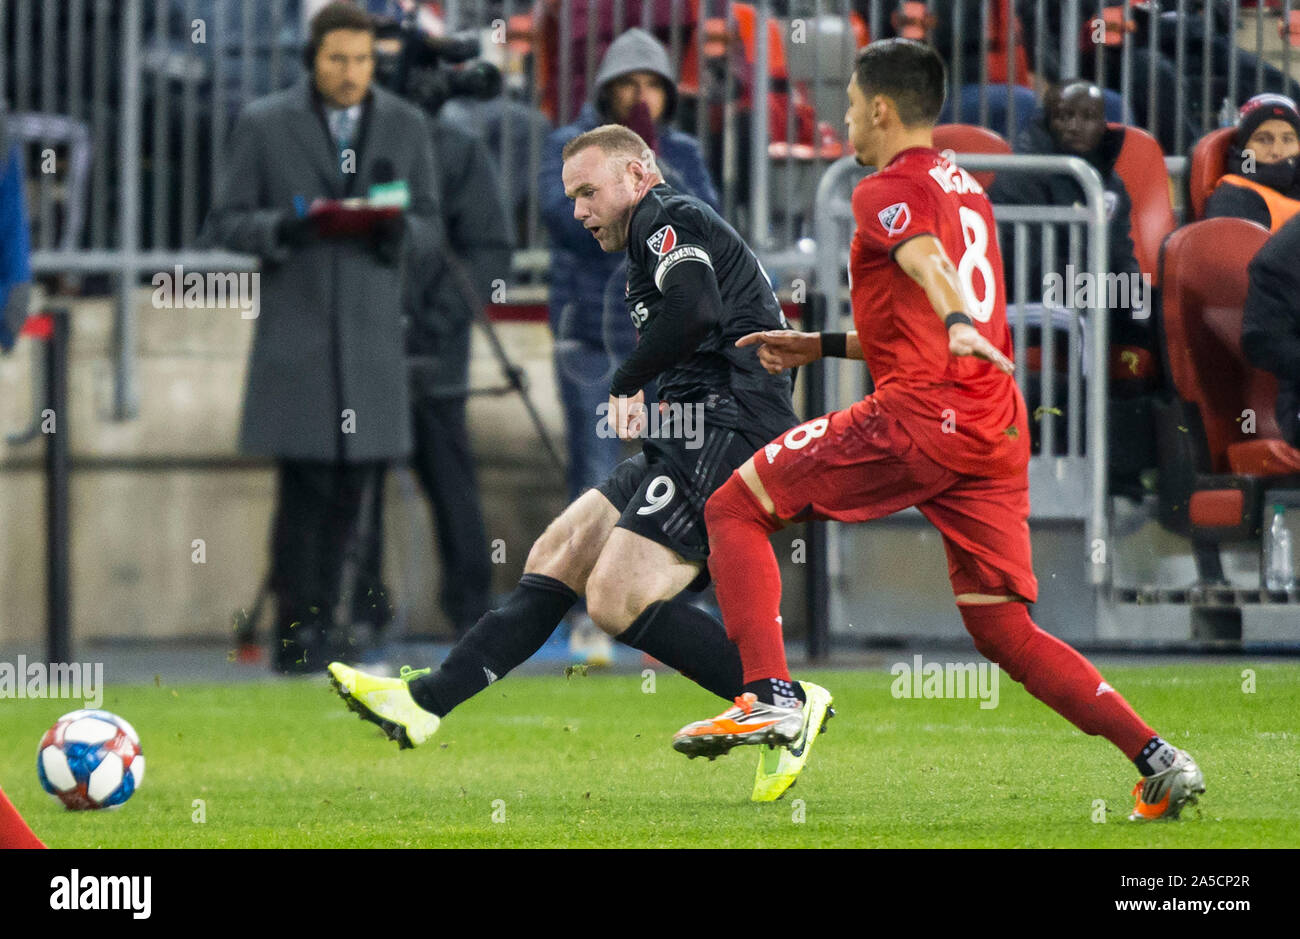 Toronto, Canada. 19th Oct, 2019. Wayne Rooney (L) of D.C. United passes the ball during the first round match of the 2019 Major League Soccer (MLS) Cup Playoffs between D.C. United and Toronto FC at BMO Field in Toronto, Canada, Oct. 19, 2019. Credit: Zou Zheng/Xinhua/Alamy Live News Stock Photo